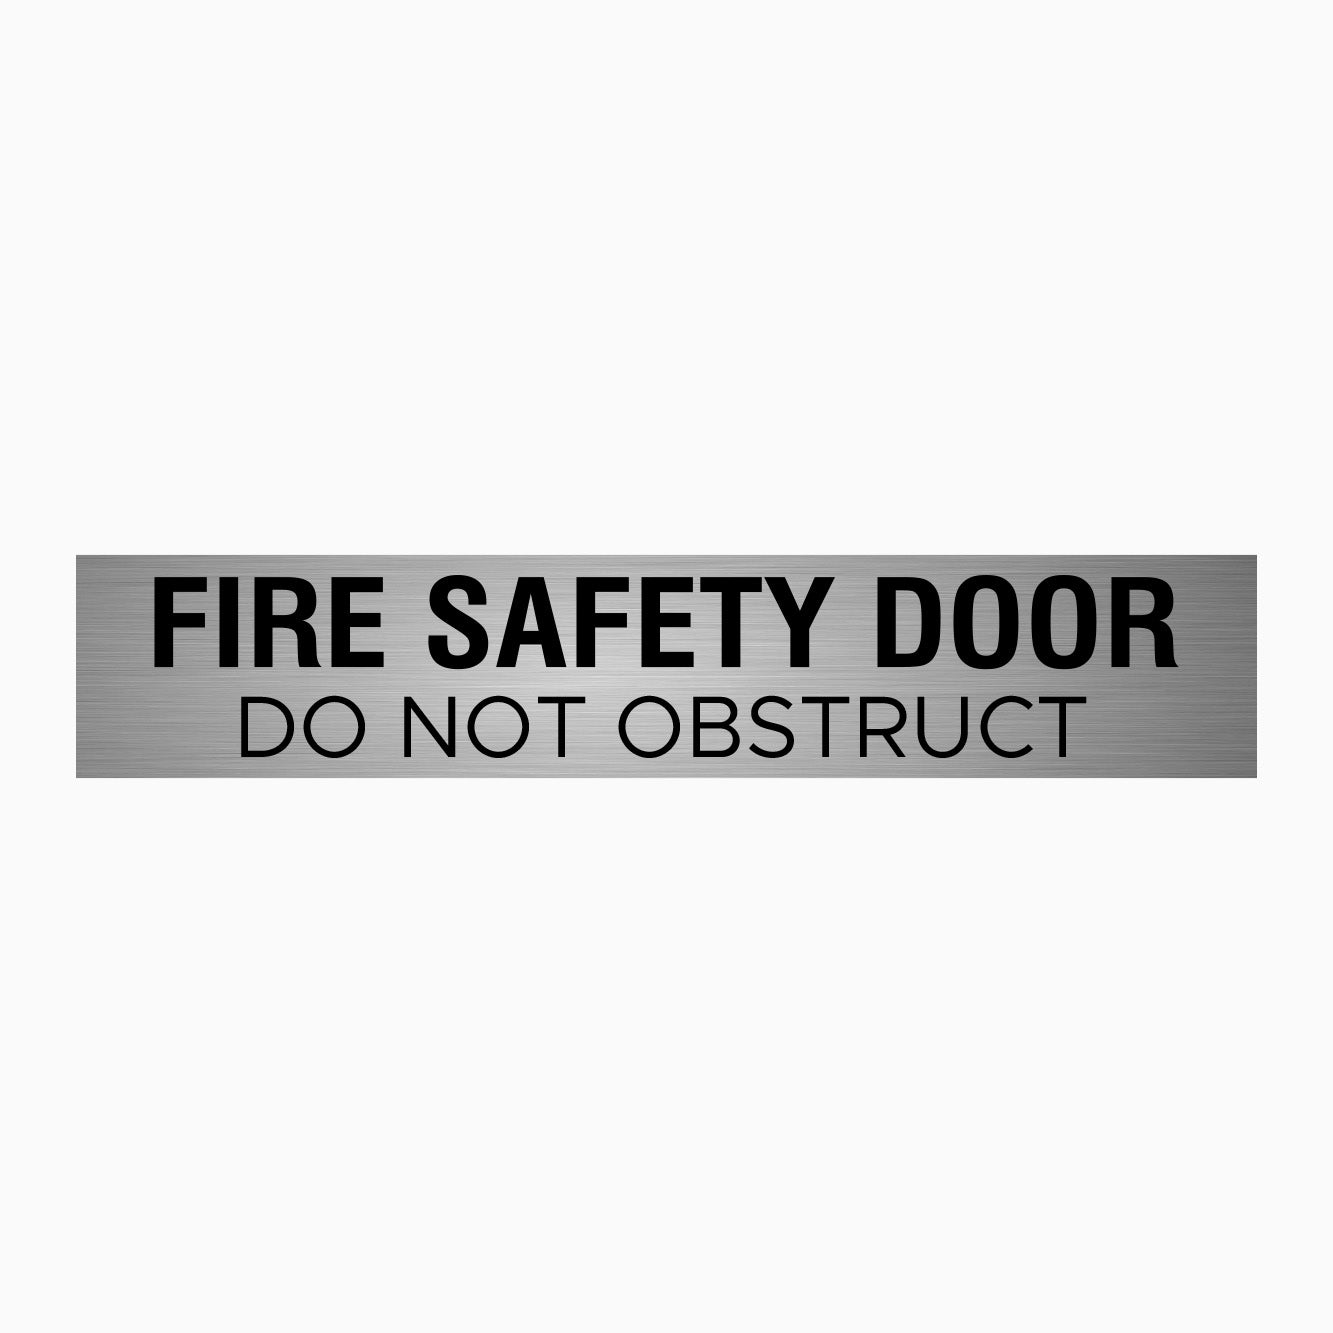 FIRE SAFETY DOOR SIGN - DO NOT OBSTRUCT SIGN - GET SIGNS AUSTRALIA